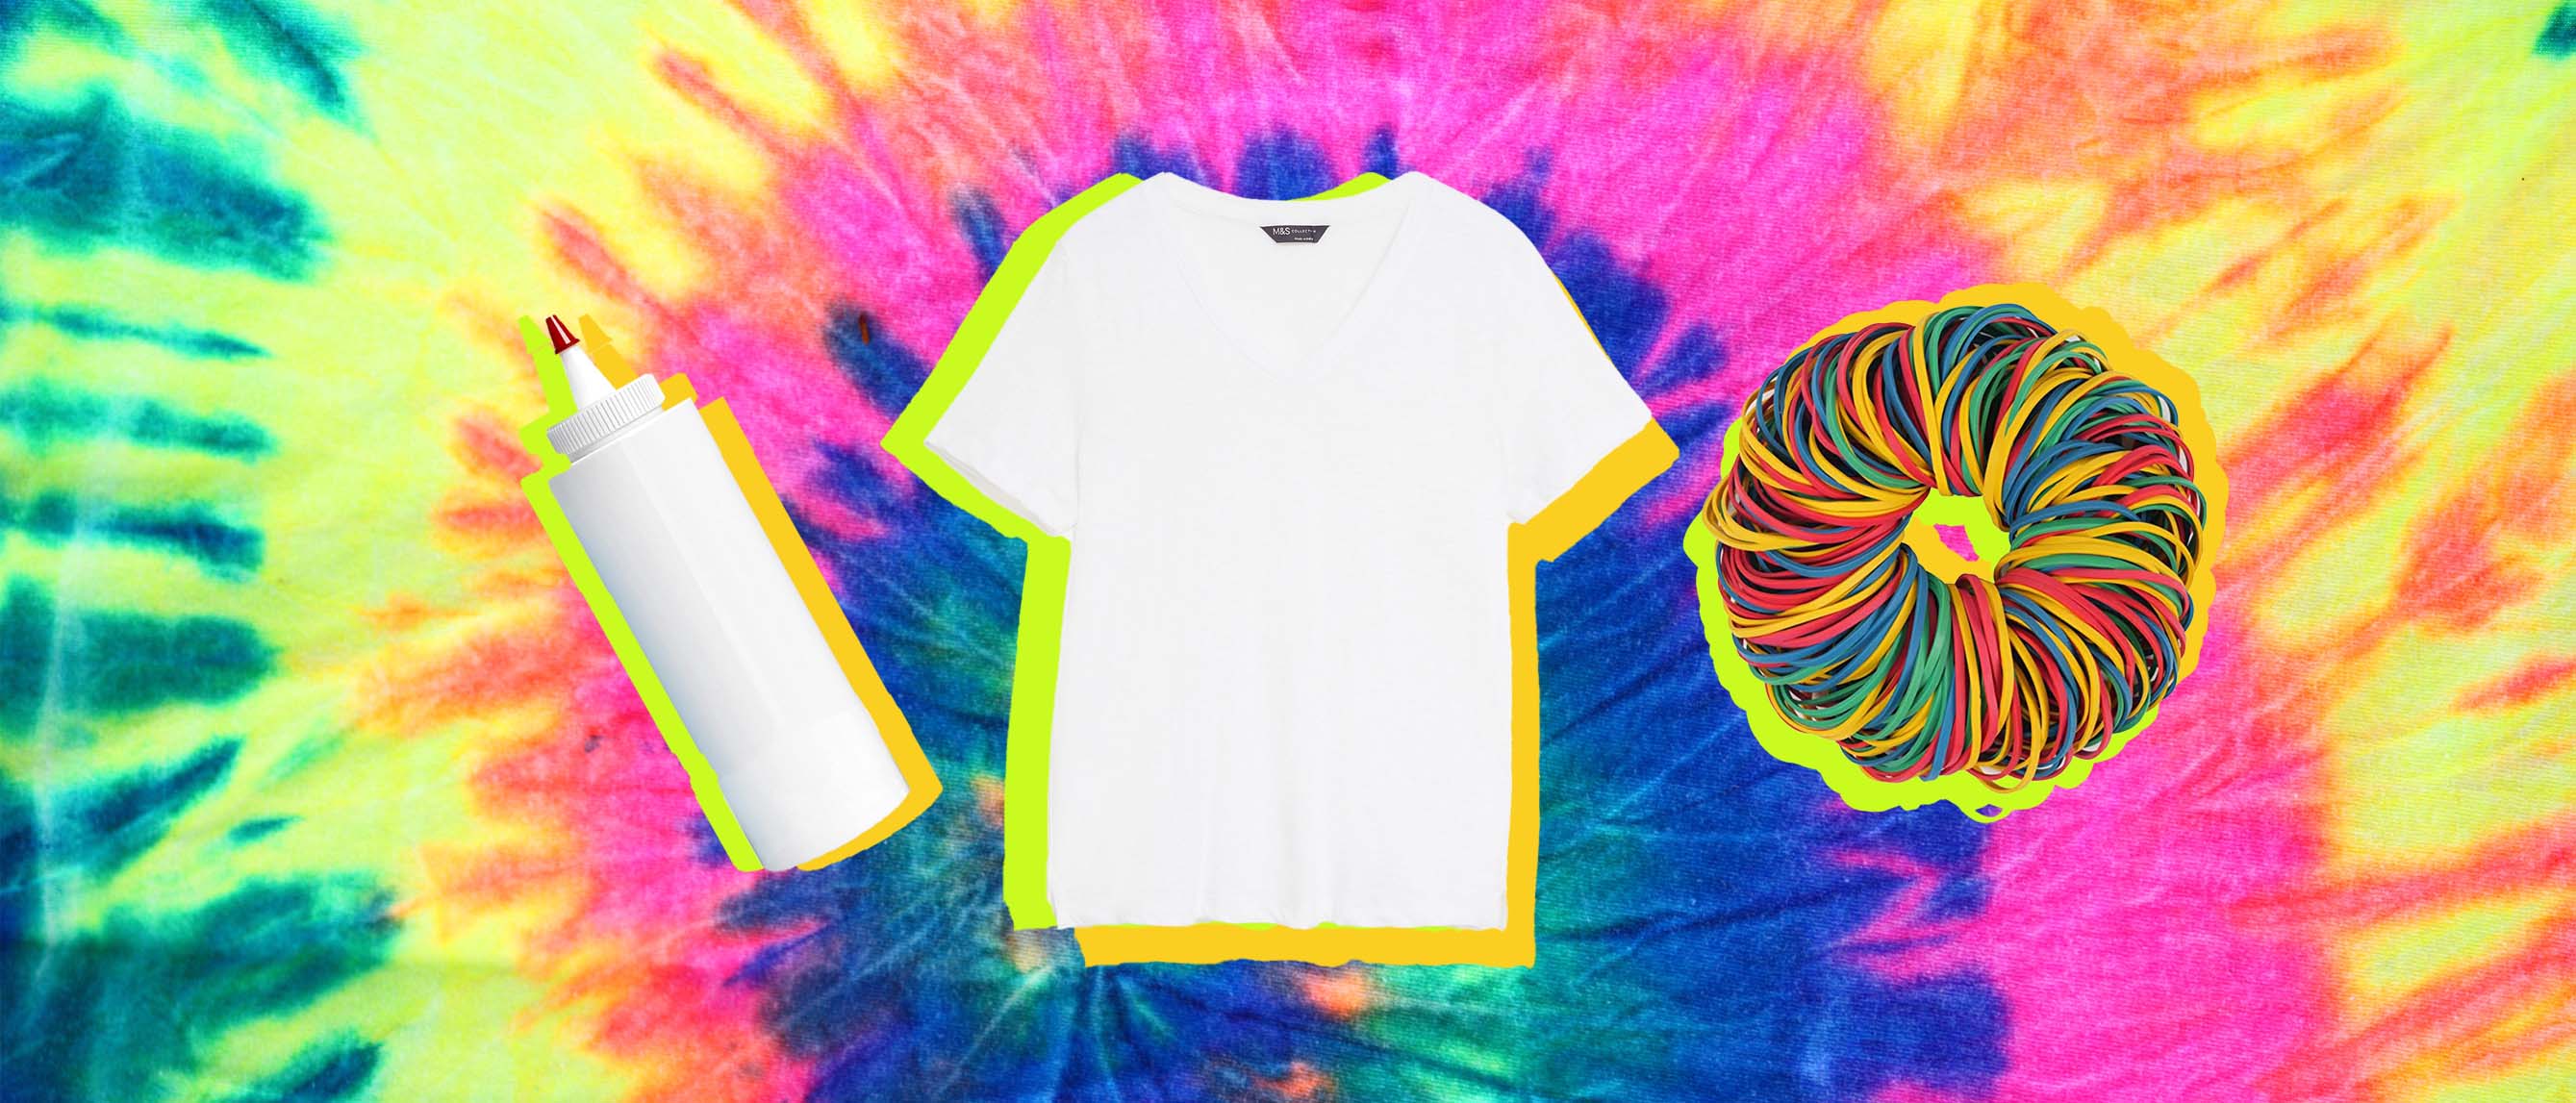 Kids Tie Dye Shirt, Pink Rainbow Spiral, Fun and Colorful Back to School  Shirt